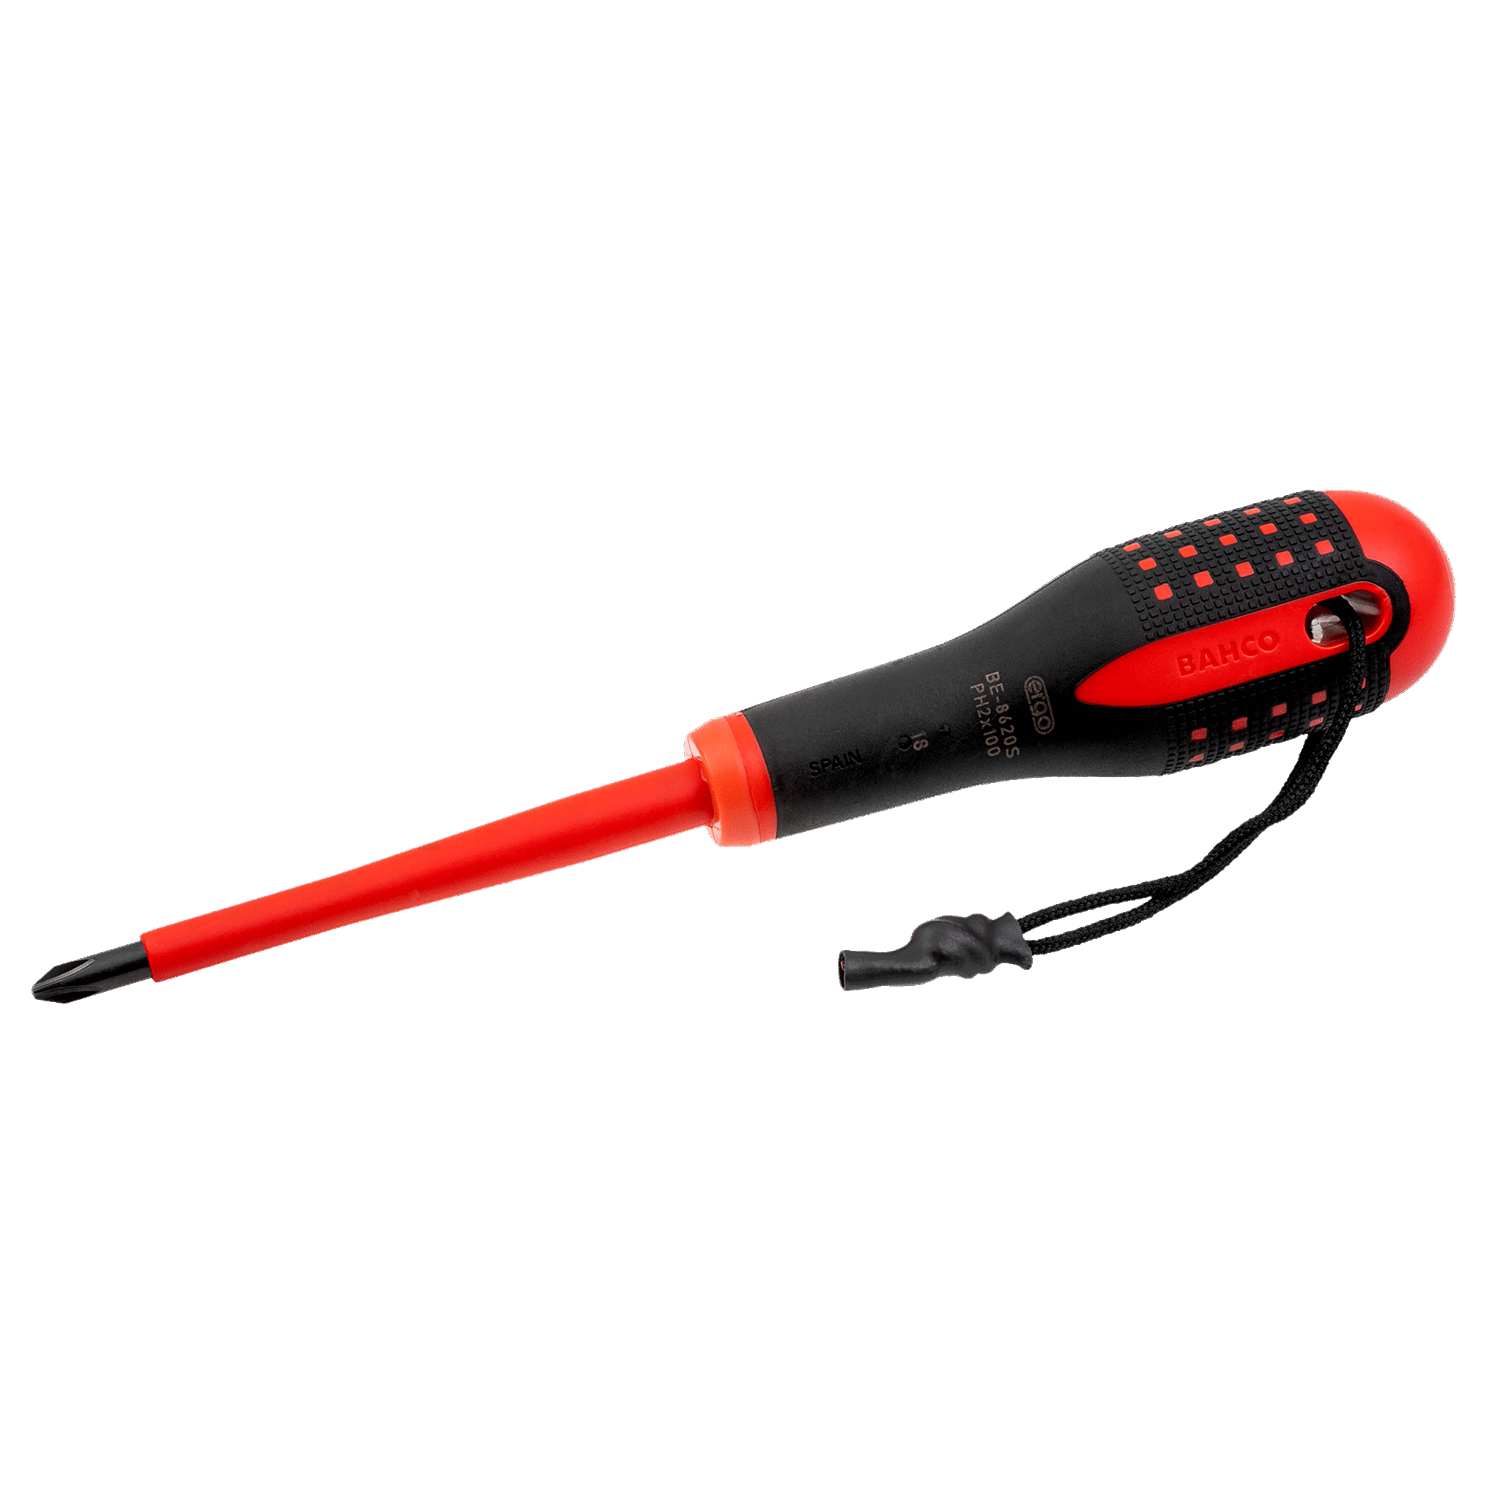 BAHCO TAHBE8610S-TAHBE8620S Insulated Phillips Screwdriver - Premium Phillips Screwdriver from BAHCO - Shop now at Yew Aik.